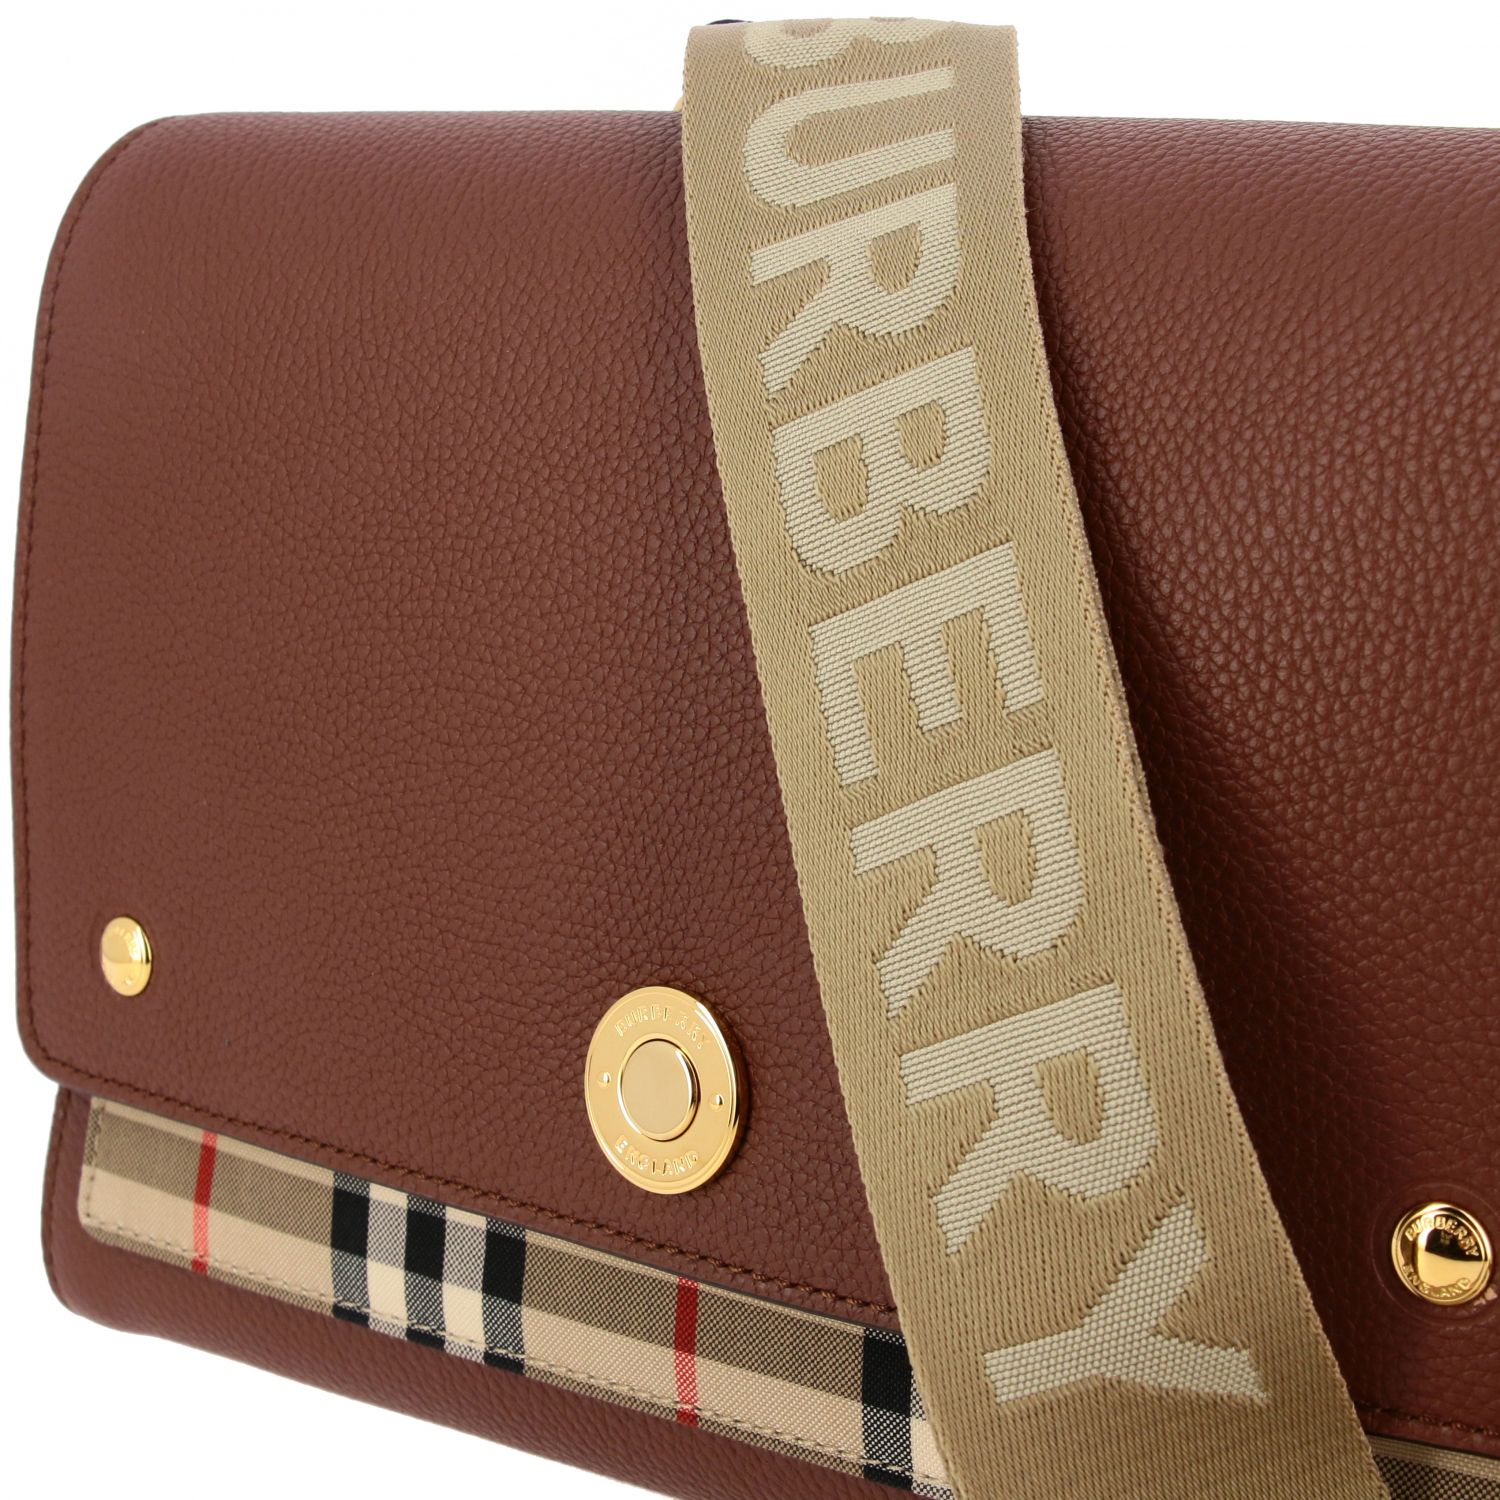 Burberry shoulder bag in textured leather and check canvas | Crossbody ...